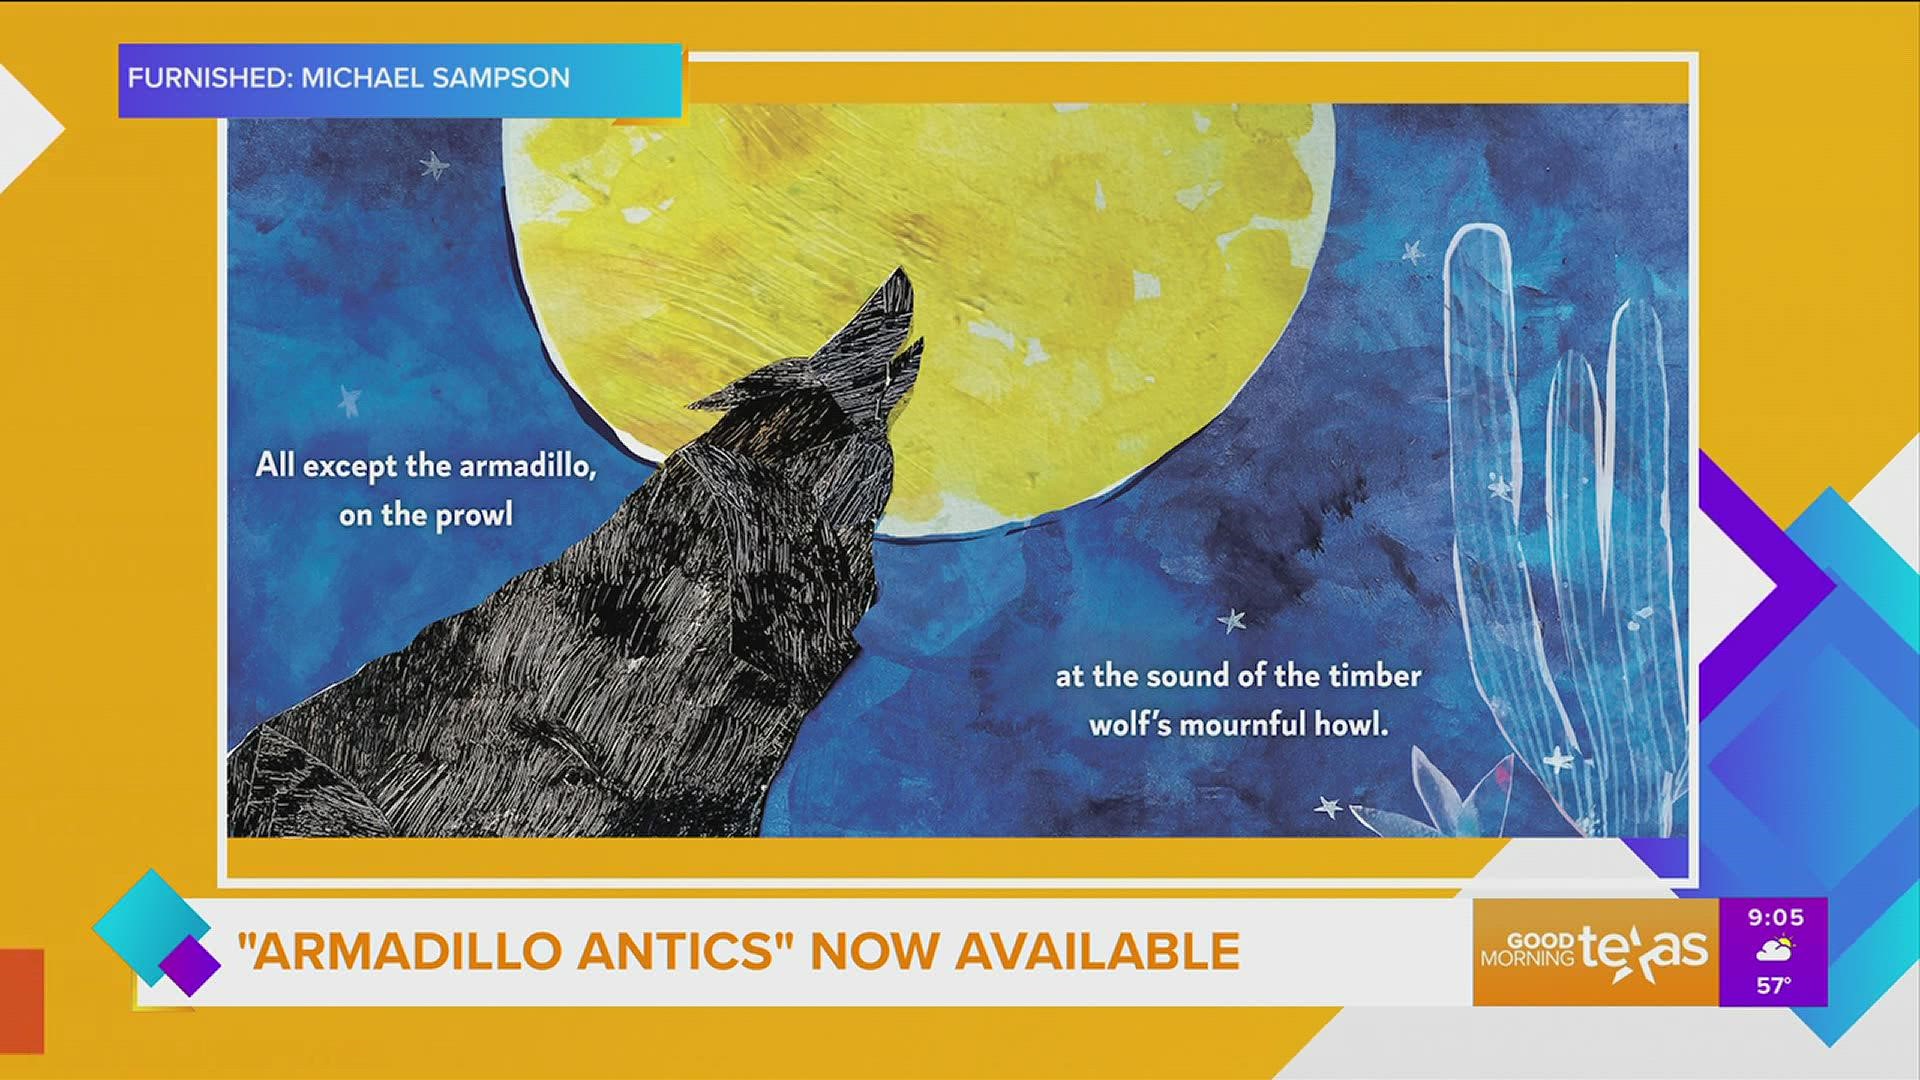 Author, Michael Sampson, takes us inside the pages of his new children’s book following an adventurous armadillo.